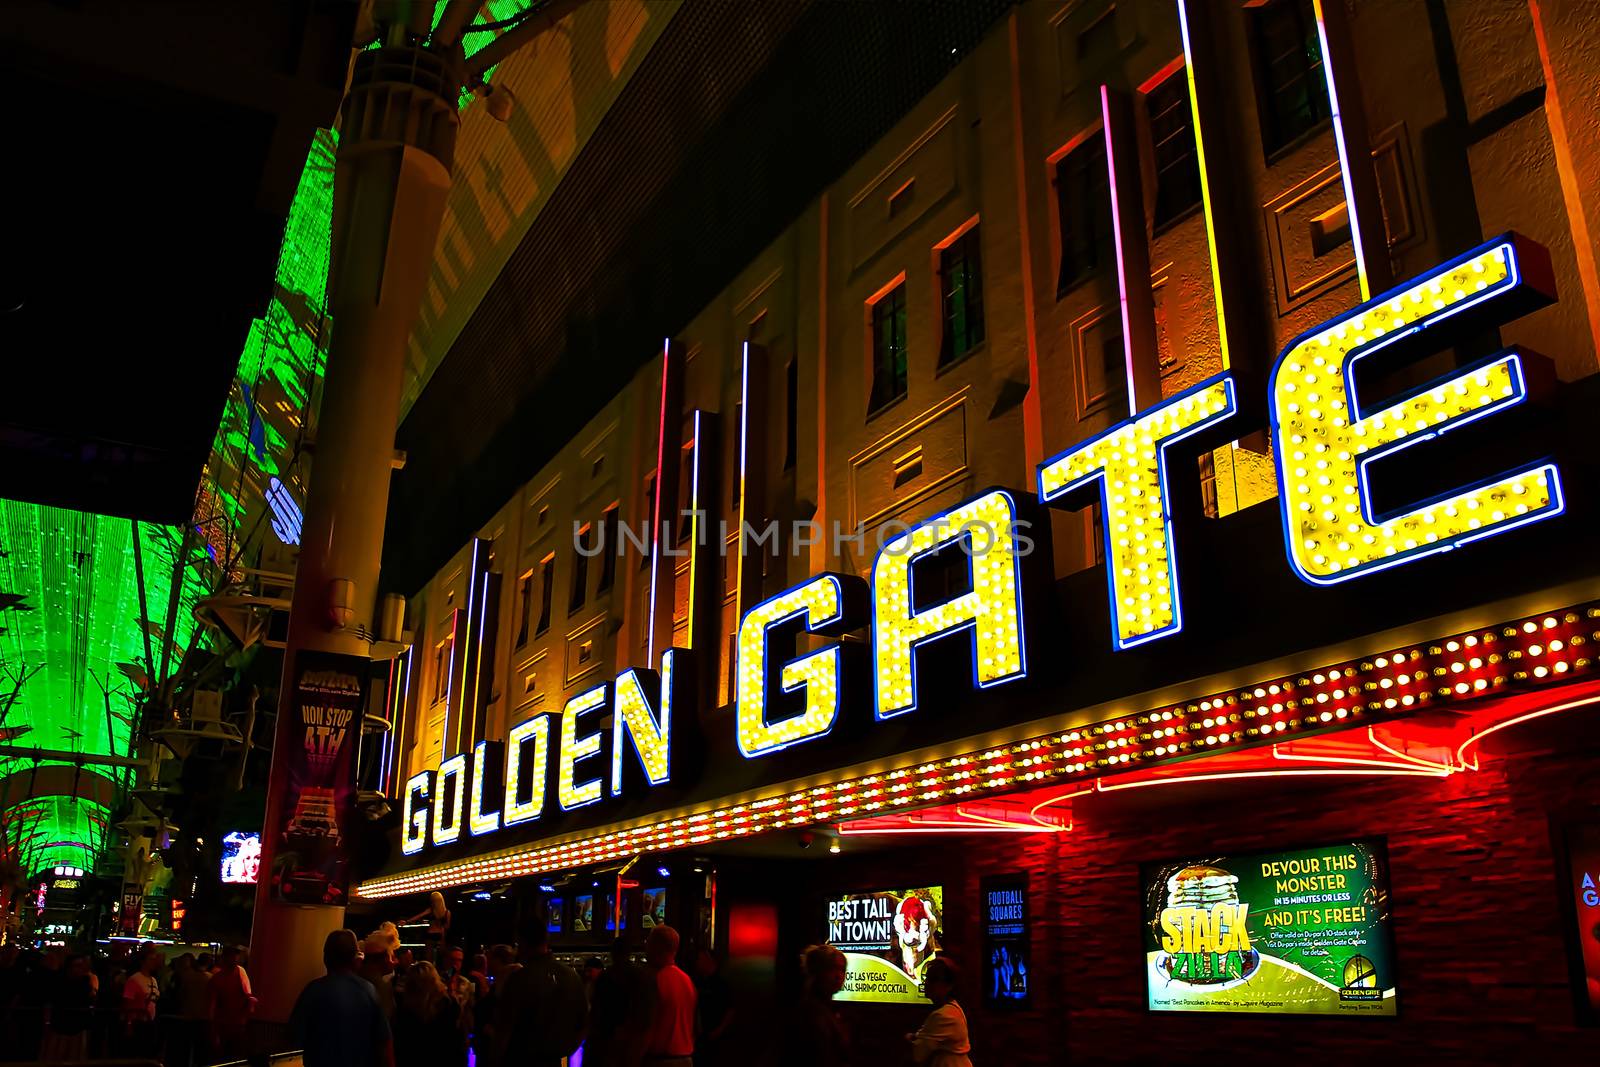 LAS VEGAS,NV - Sep 16, 2018: Golden Gate Hotel & Casino sign illuminated by night in Las Vegas. It is the oldest and smallest hotel located on the Fremont Street Experience. by USA-TARO